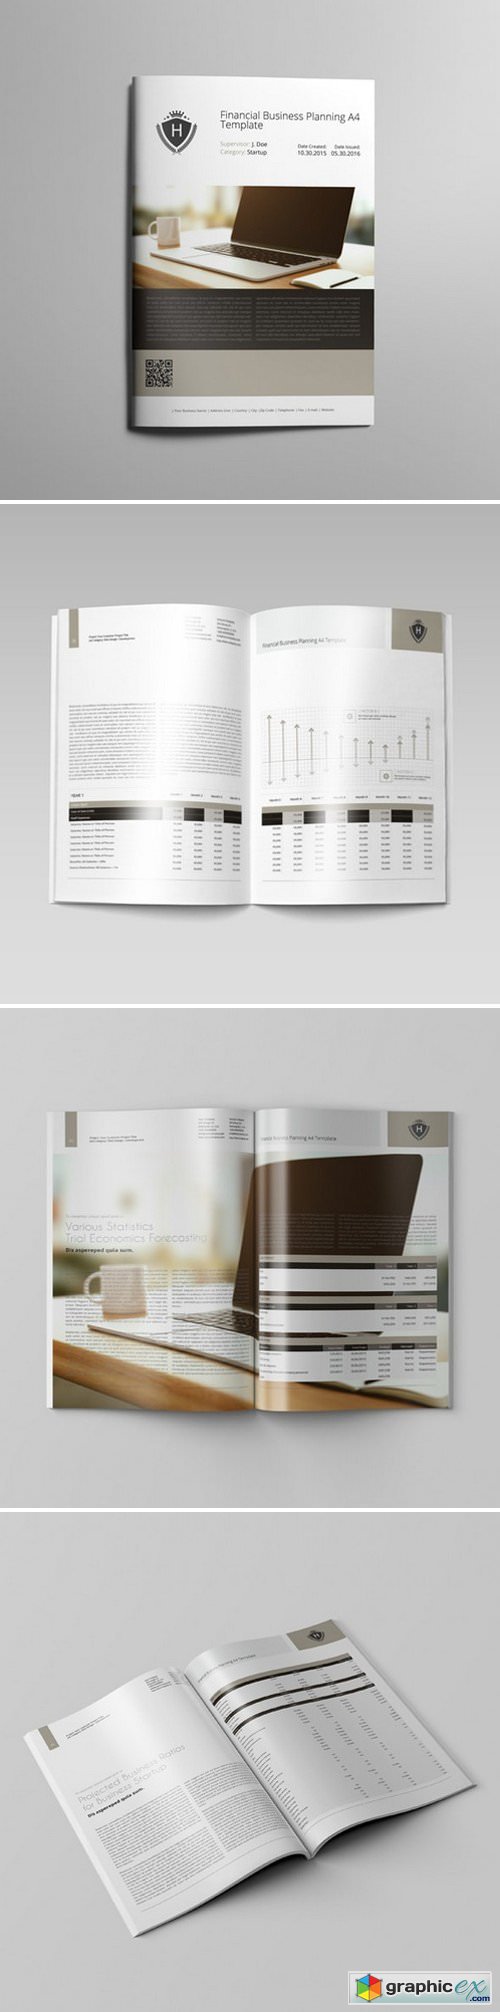 KeBoto - Financial Business Planning A4 Template